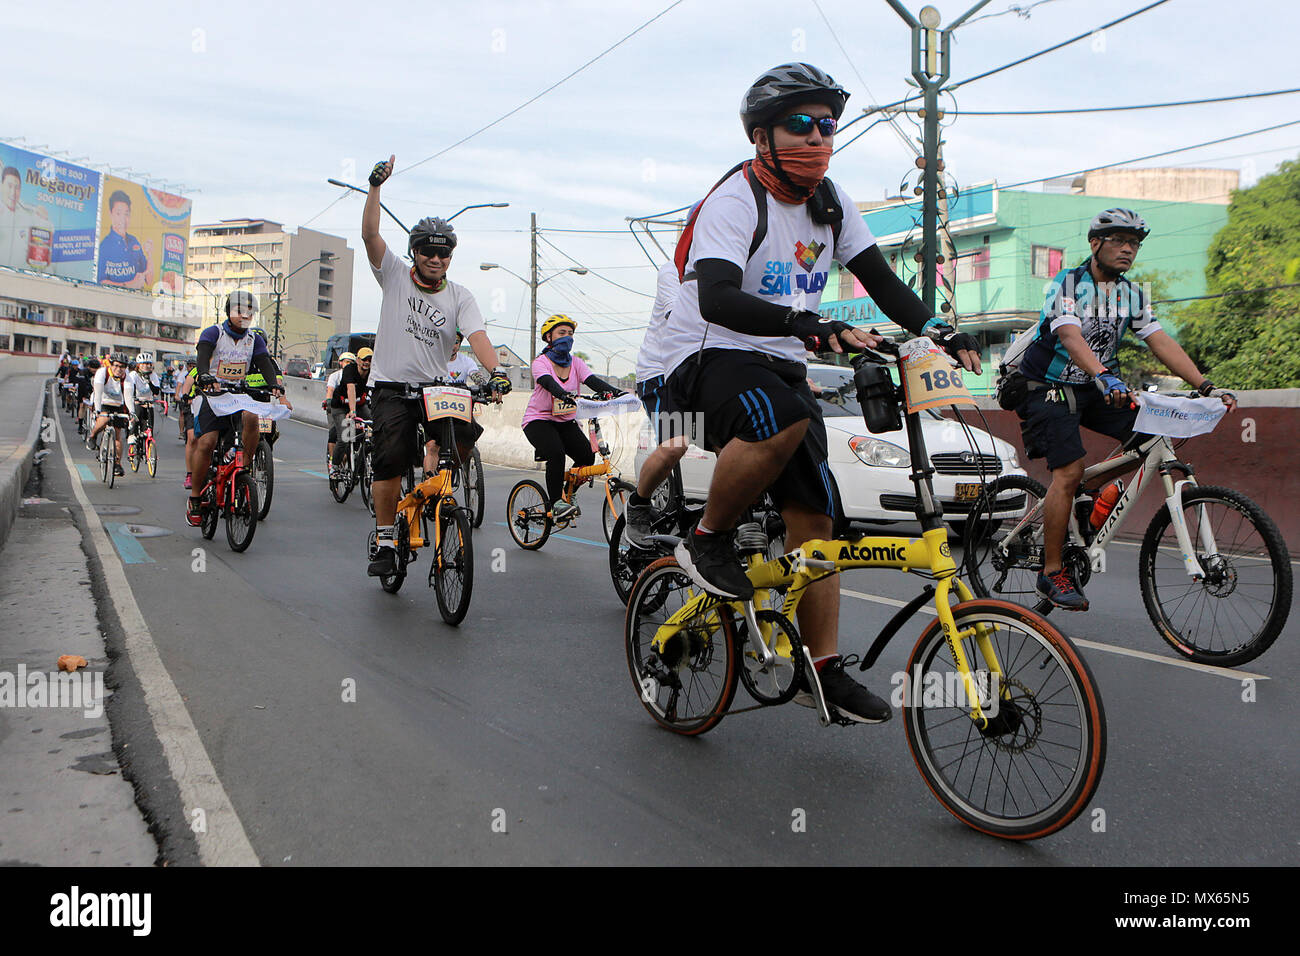 Manila, Philippines. 3rd June, 2018. Members from environmental and bicycle groups ride together during a rally commemorating the "World Bicycle Day" and "International Plastic Bag Free Day" in Manila, the Philippines, on June 3, 2018. Credit: Rouelle Umali/Xinhua/Alamy Live News Stock Photo